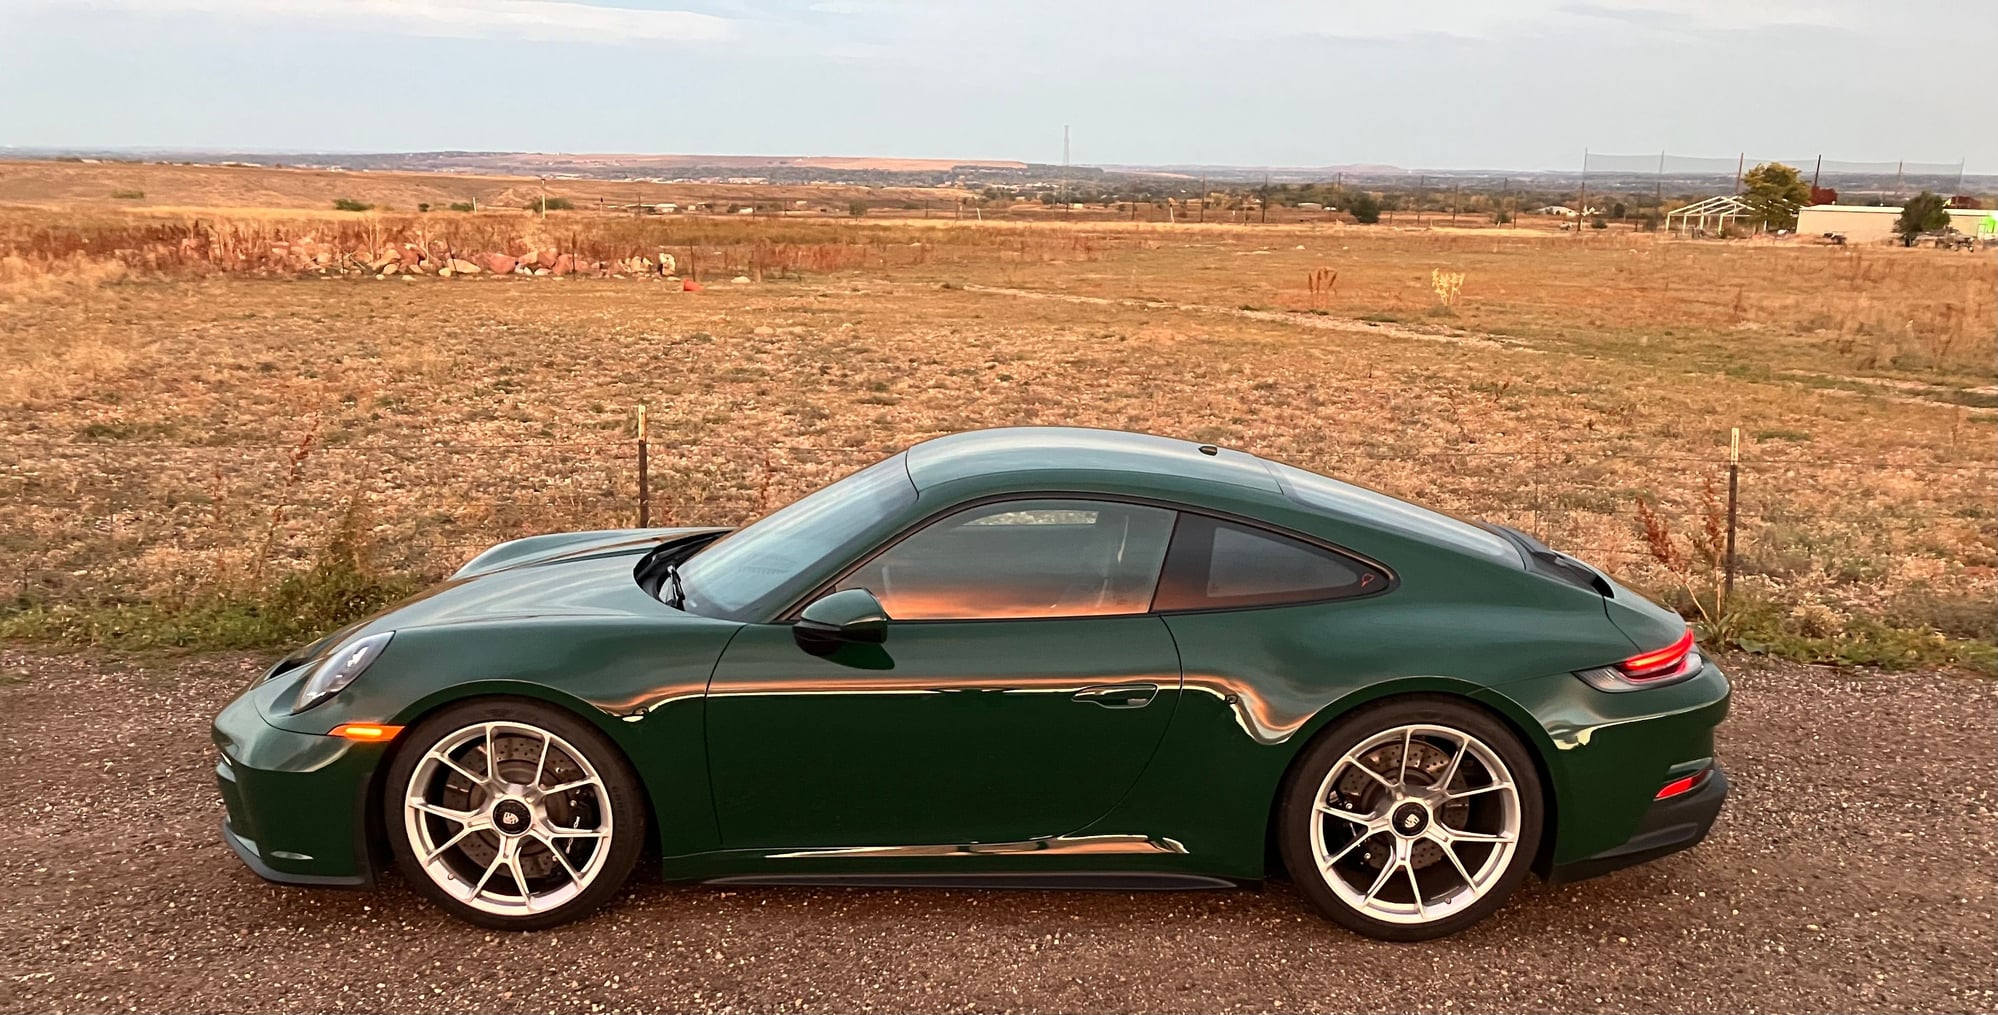 2022 Porsche 911 - 2022 Porsche 911 GT3 Touring in British Racing Green (PTS) - Used - Boulder, CO 80304, United States